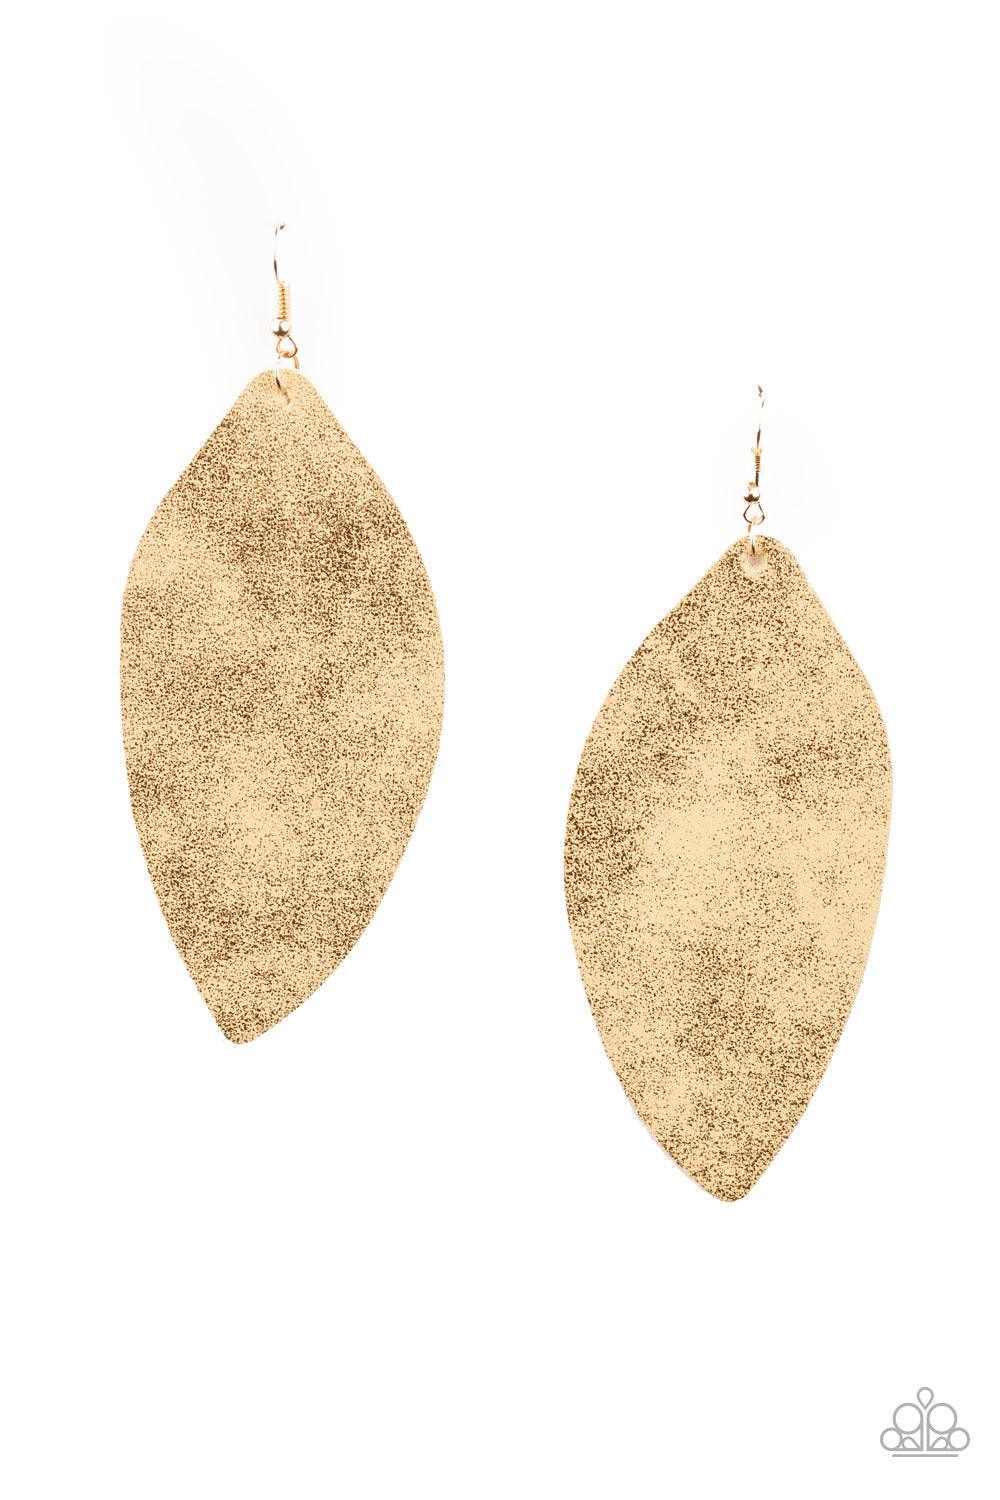 Paparazzi Accessories Serenely Smattered - Gold Dusted in a golden shimmer, an asymmetrical piece of leather swings from the ear in a statement-making fashion. Earring attaches to a standard fishhook fitting. Jewelry